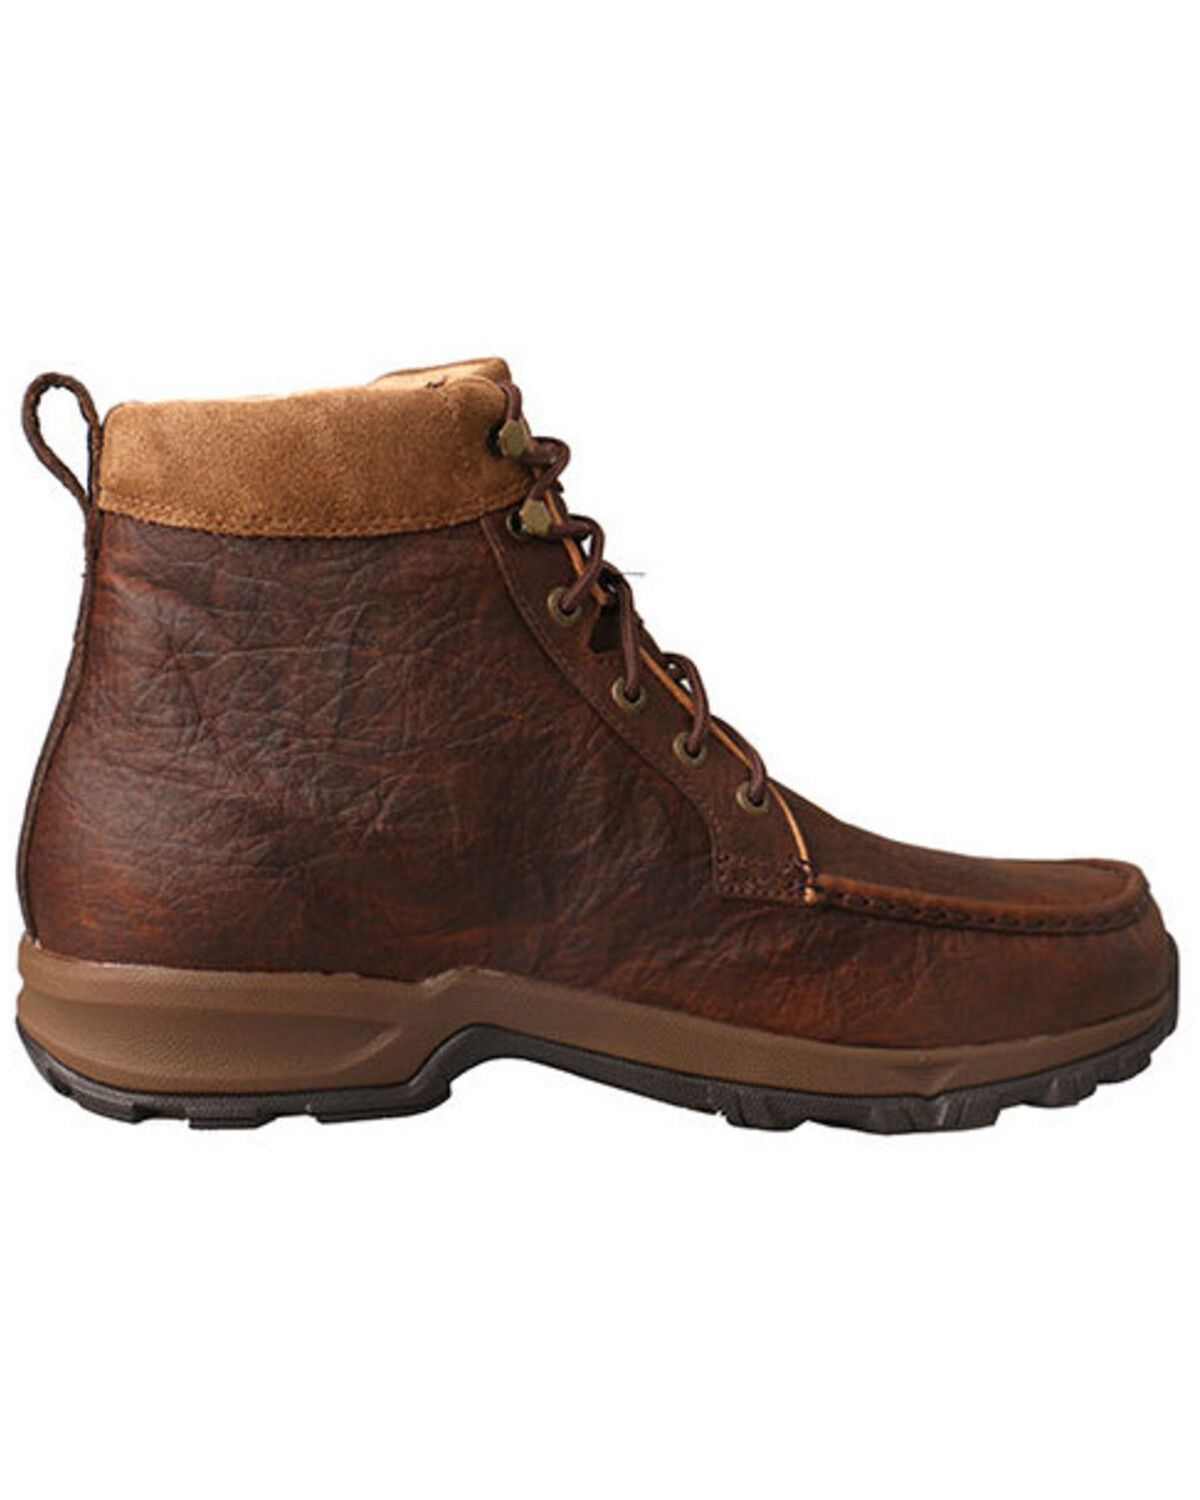 mens insulated casual boots